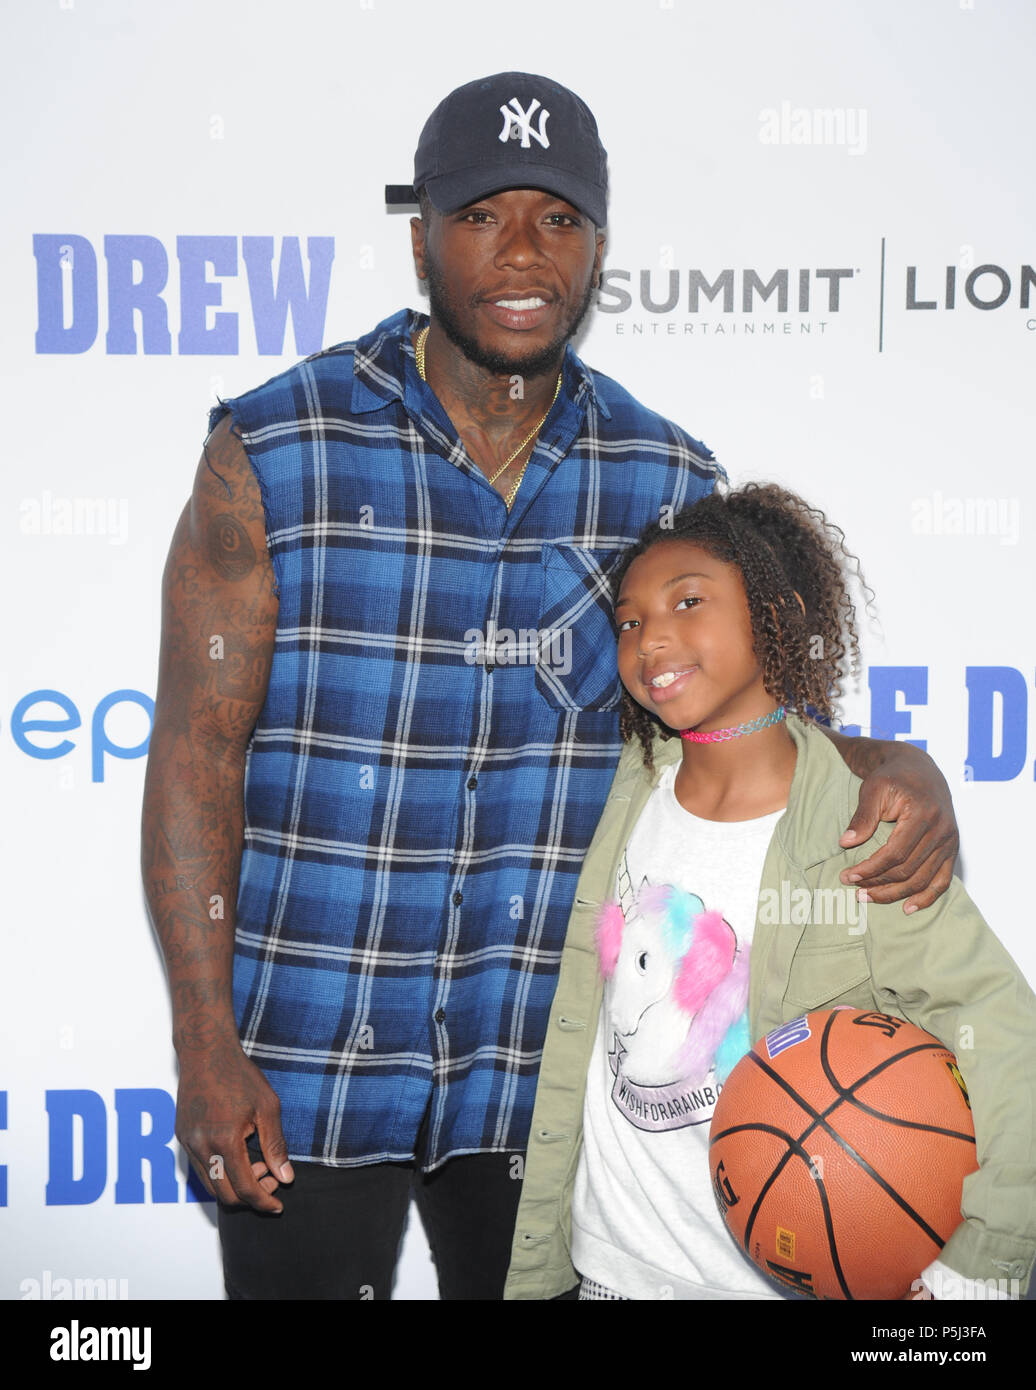 New York, NY, USA. 26th June, 2018. Nate Robinson attends the